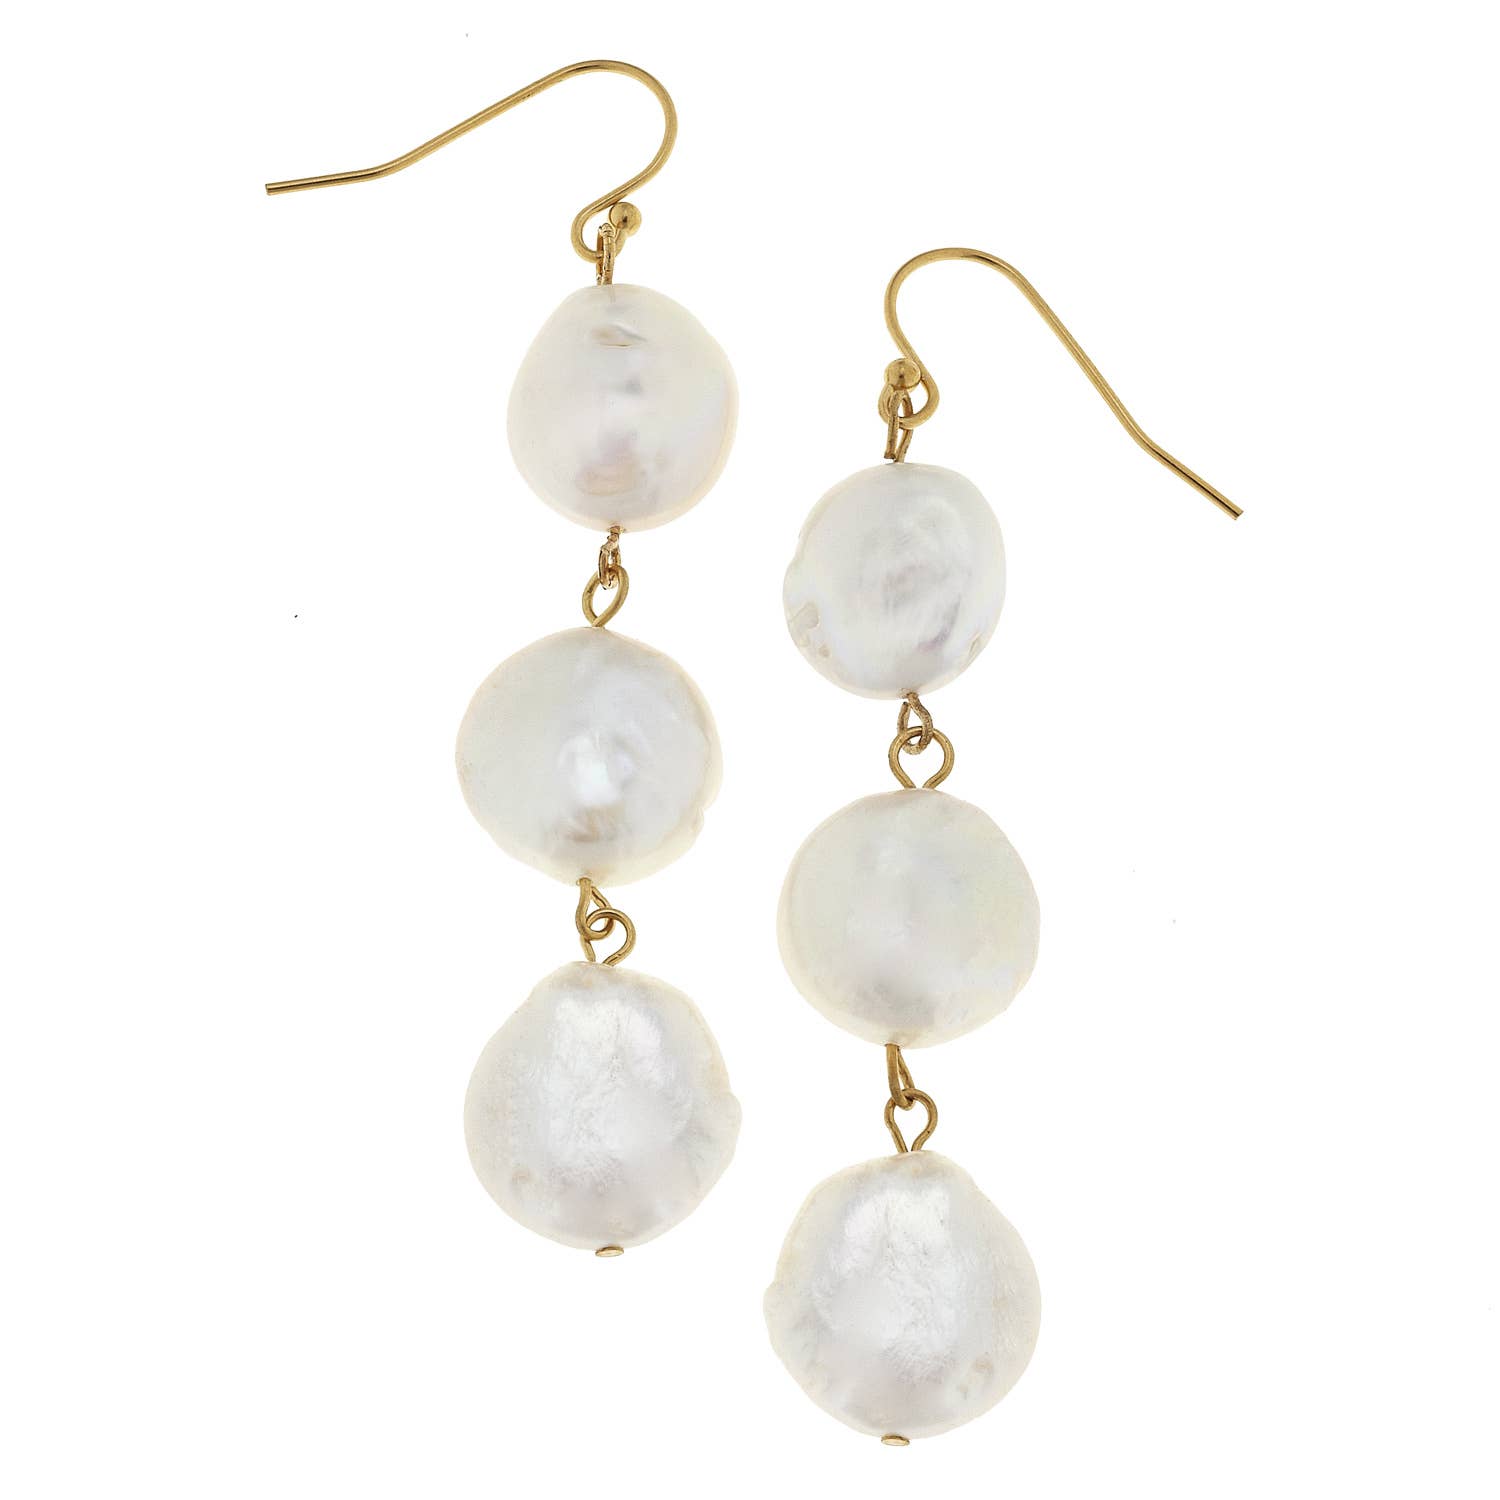 Susan Shaw - Gold and 3 Genuine Coin Pearl Earrings